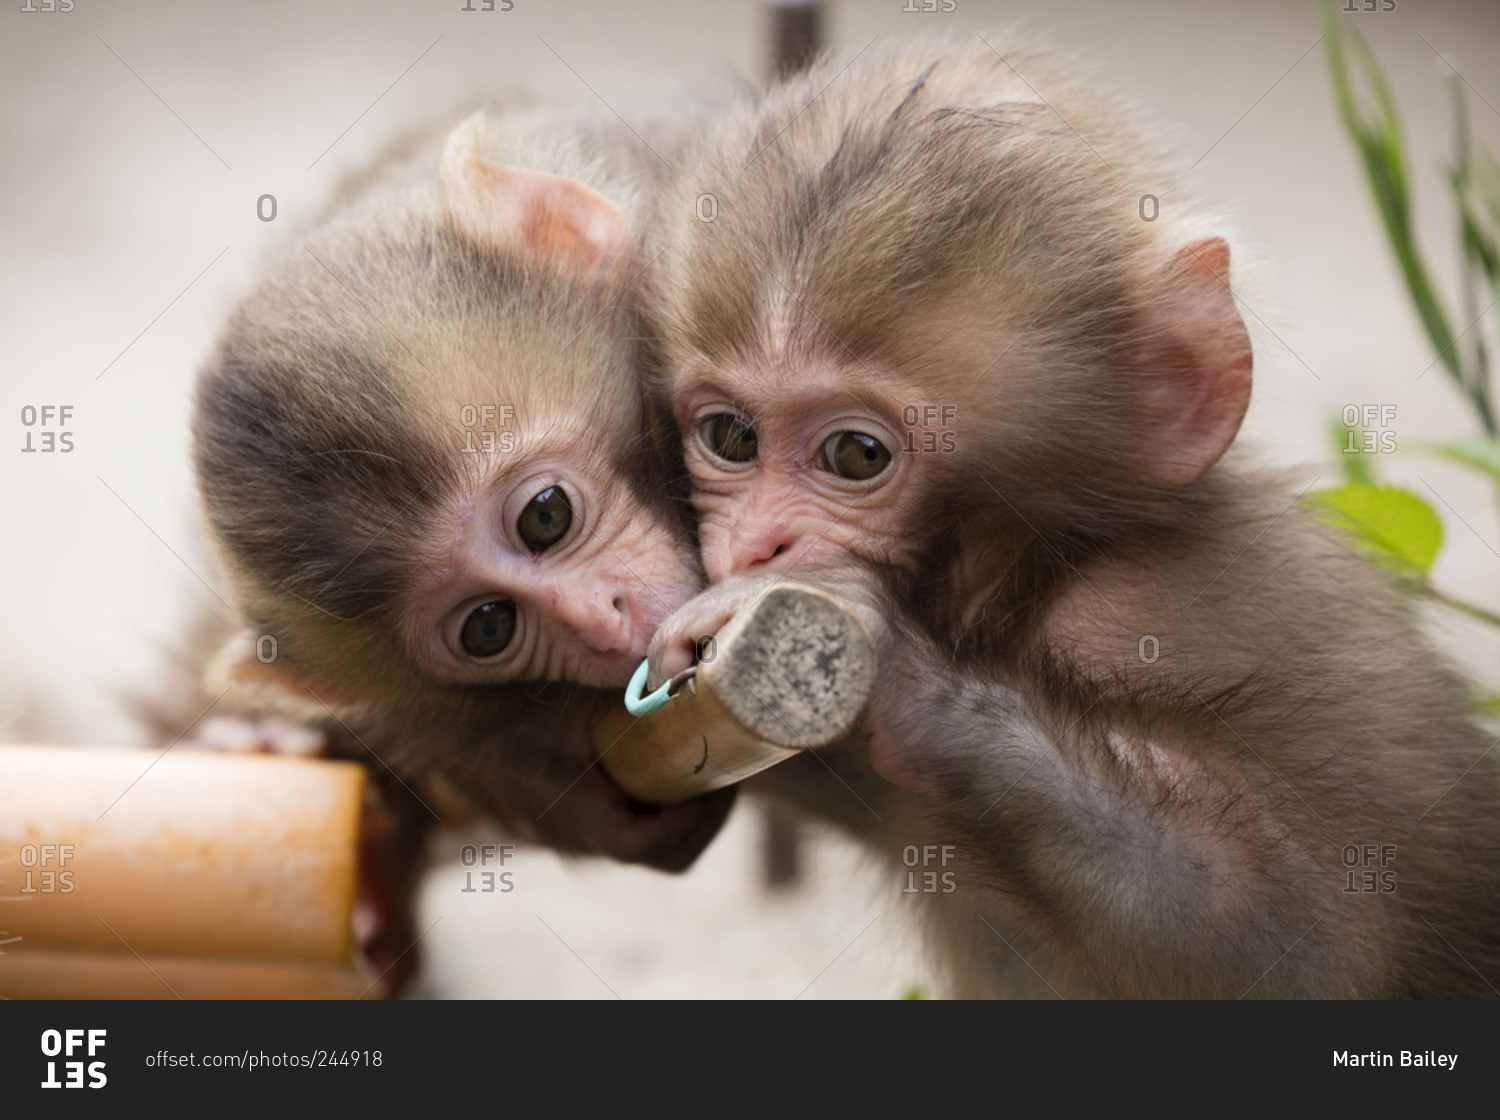 Two baby snow monkeys playing with broom handle